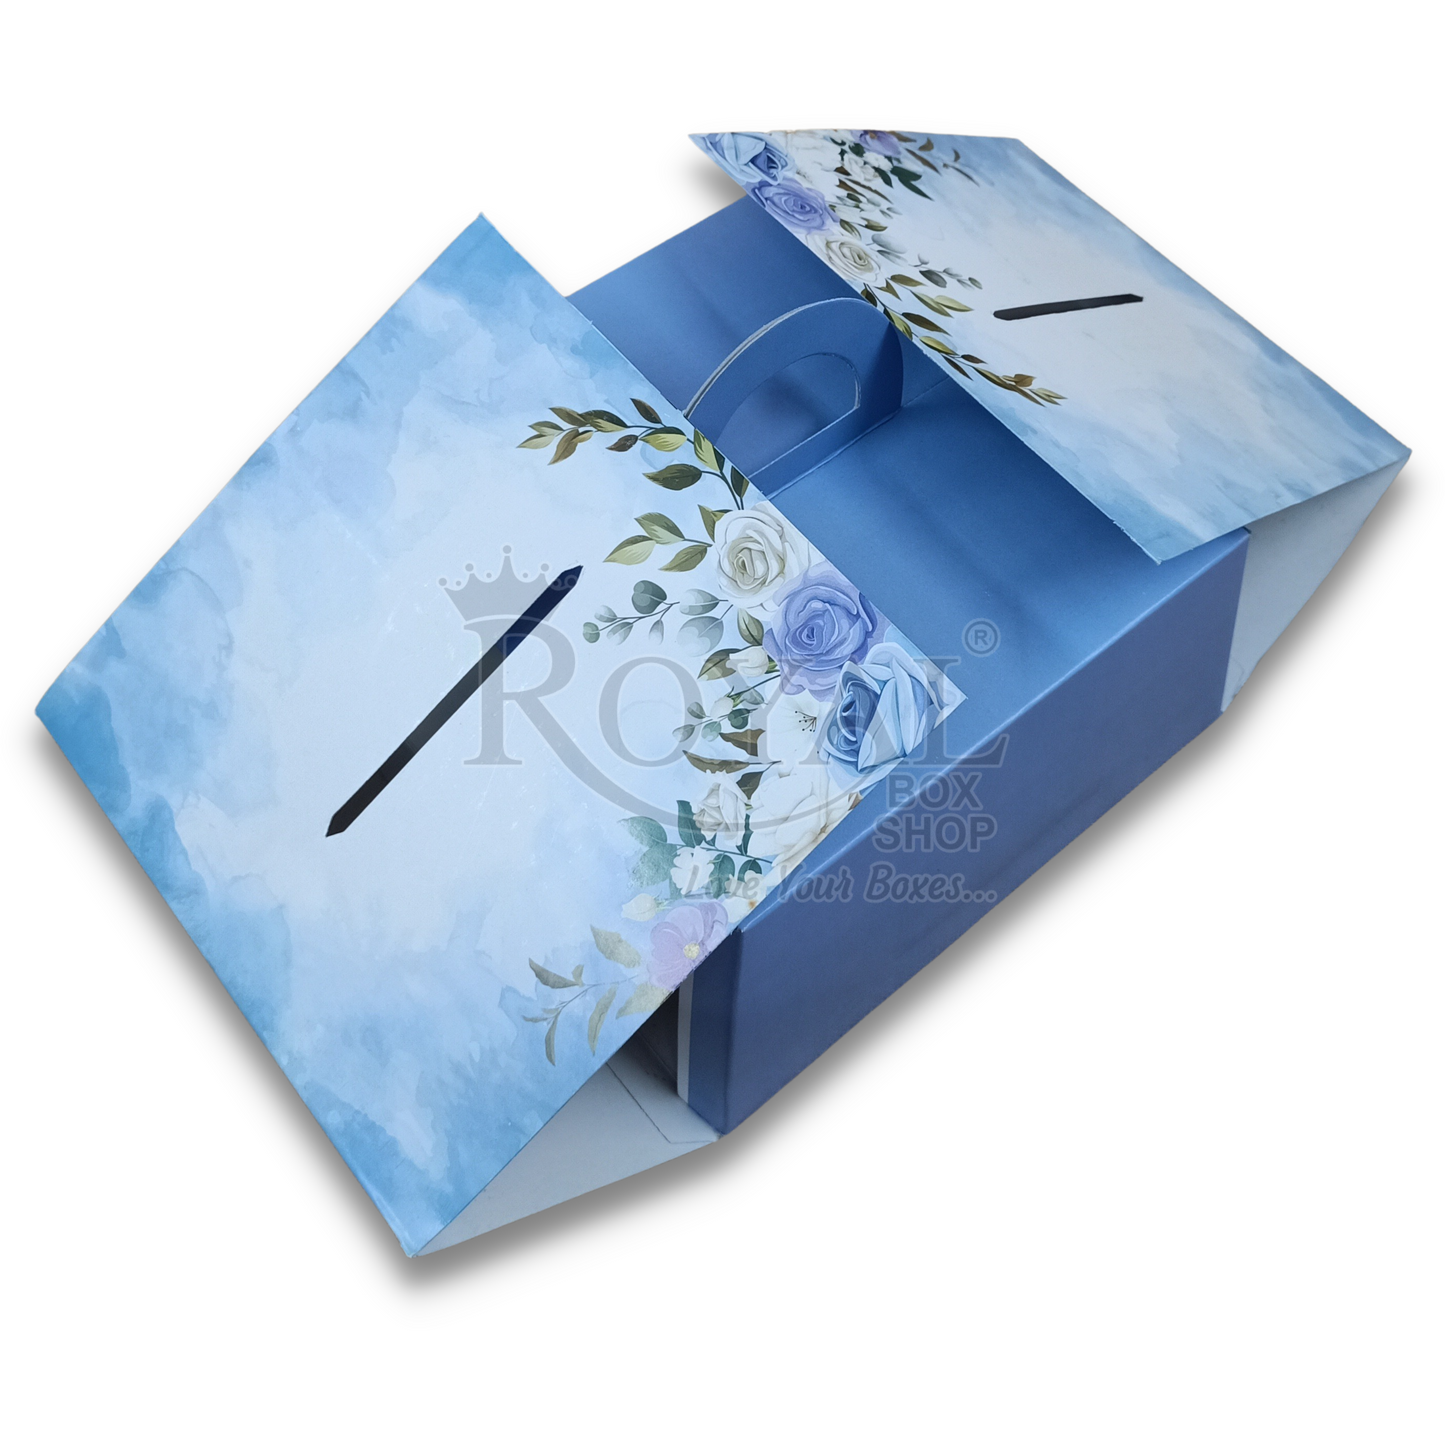 Cake Box with Handle - 10 x 10 x 5 inch - Blue - Dome Style Royal Box Shop